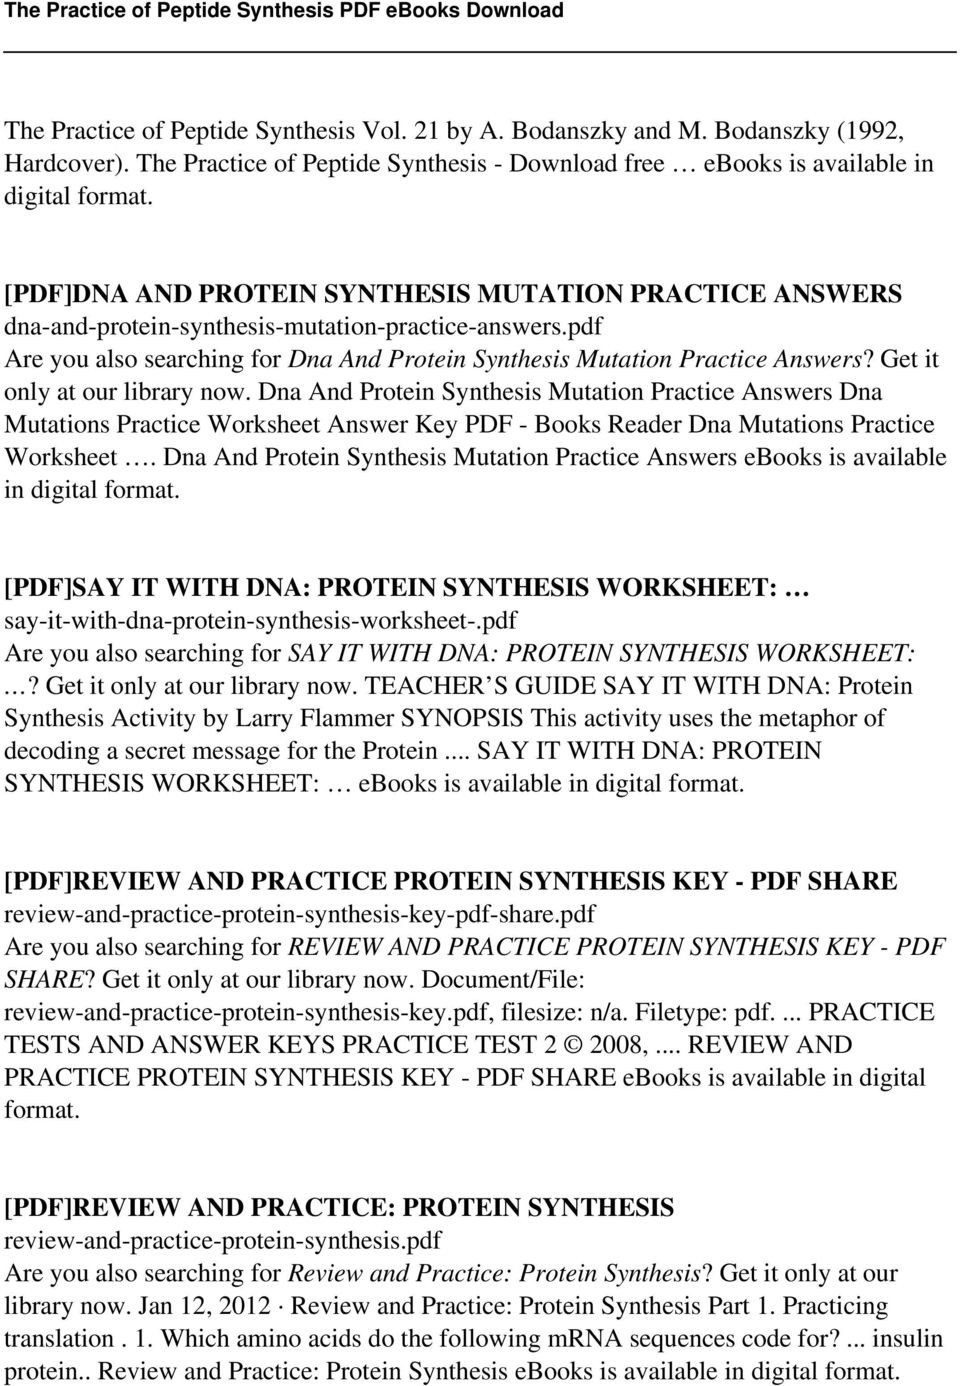 Dna Mutations Practice Worksheet Answer the Practice Of Peptide Synthesis Pdf Free Download